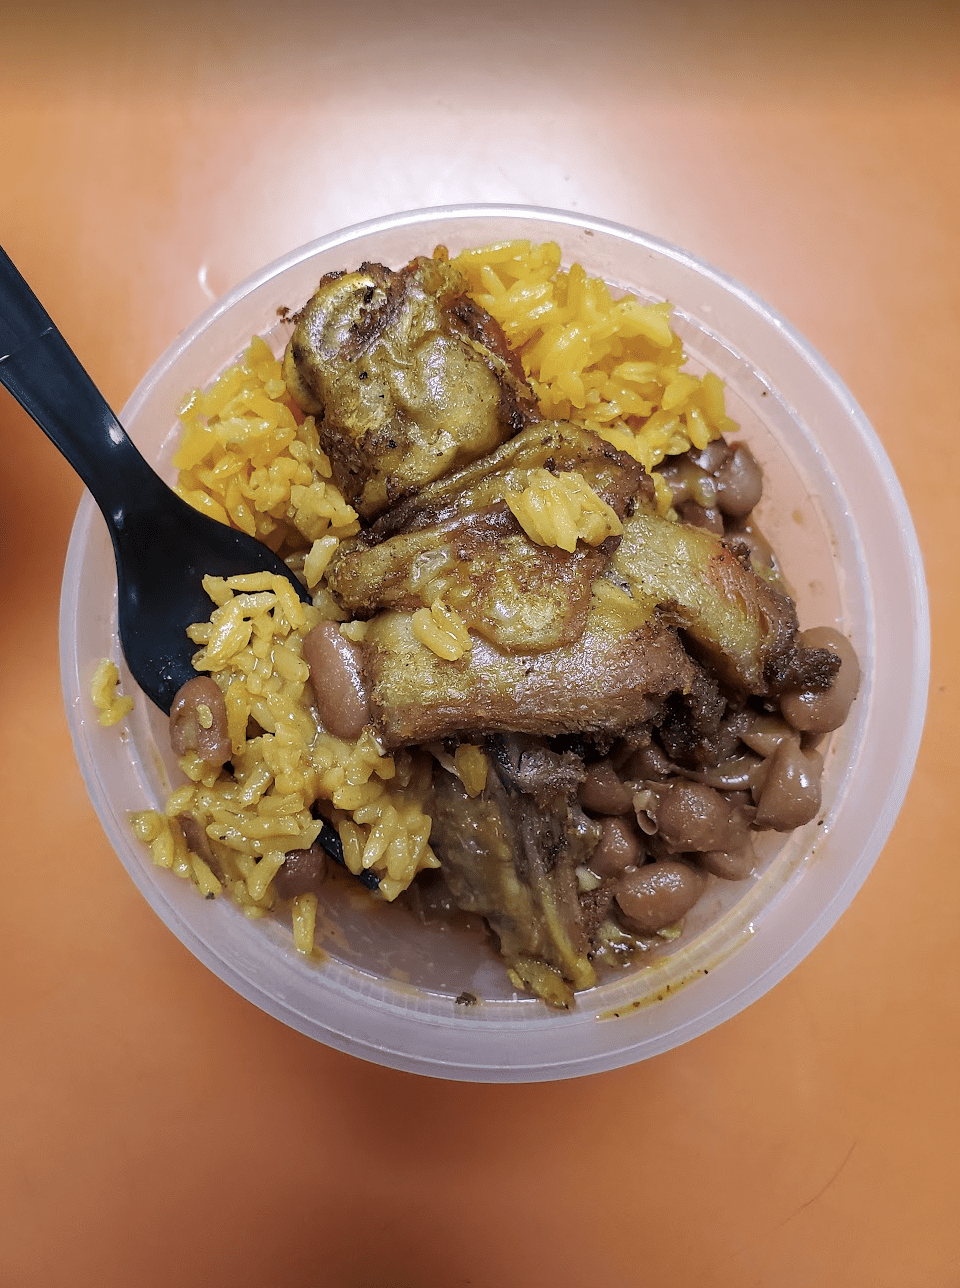 Chicken, rice and beans from Margon, one of the best cheap eats in Midtown, New York City